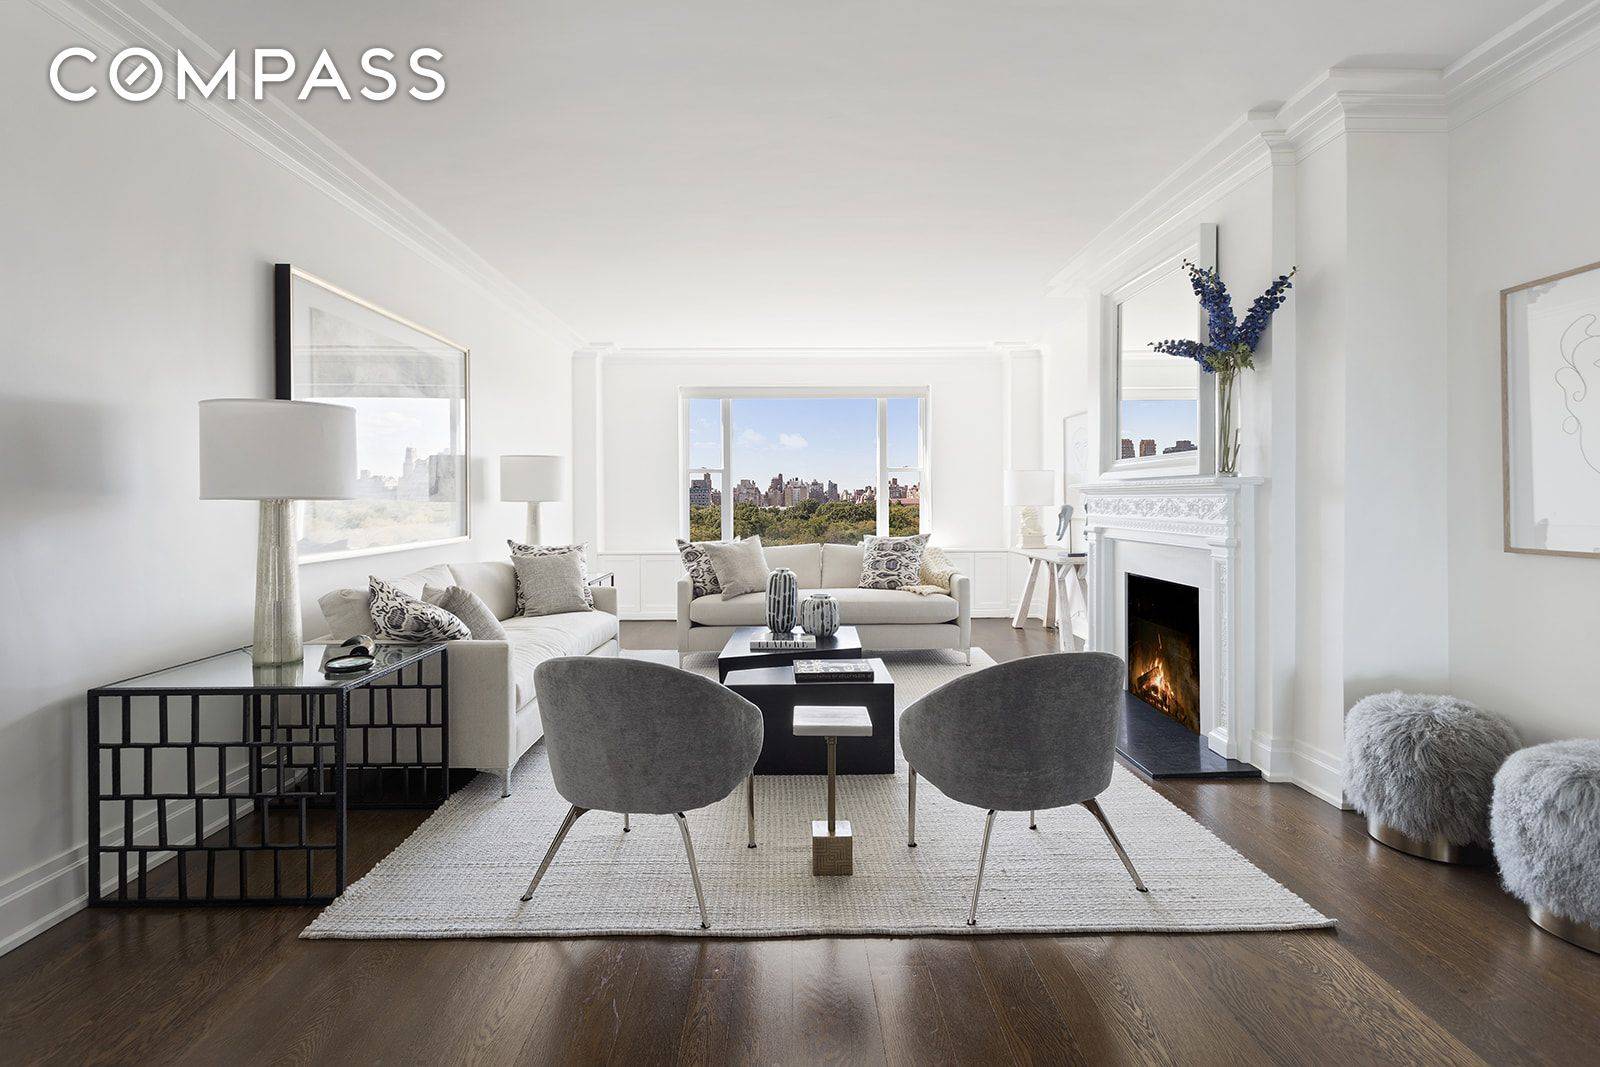 https 955fifthave13b. com 1, 000, 000 PRICE REDUCTION ON THIS QUINTESSENTIAL FIFTH AVENUE HOME ON CENTRAL PARK.